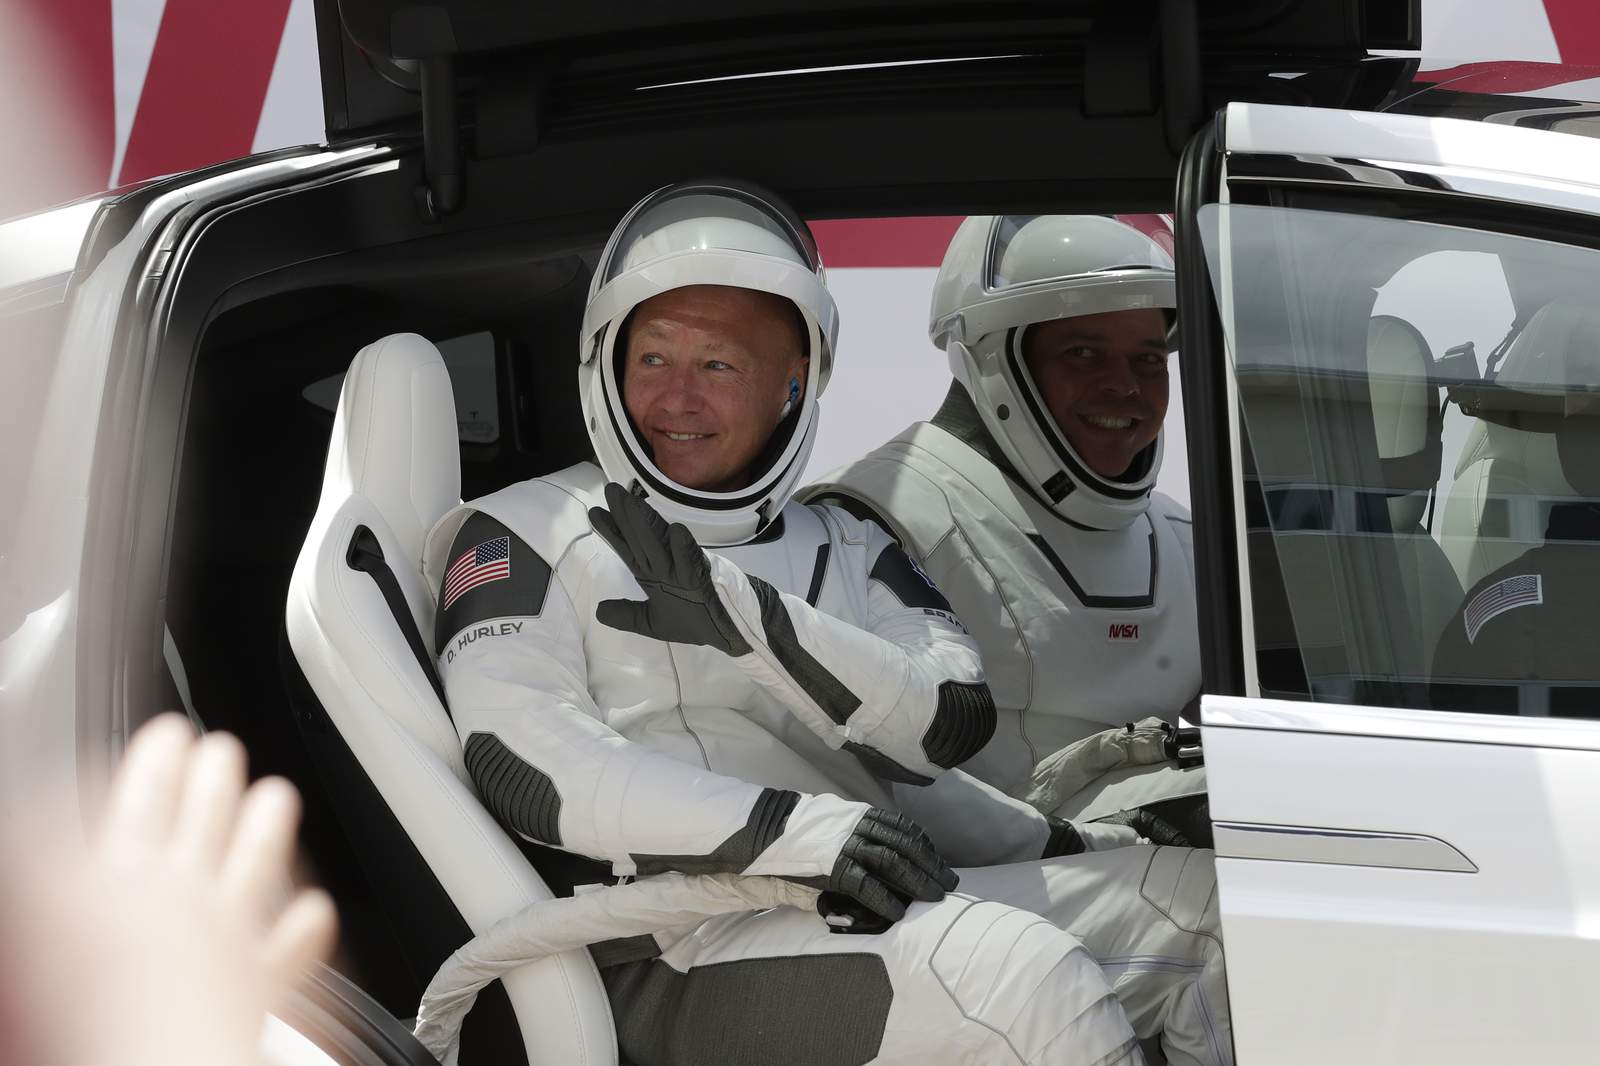 NASA astronauts Douglas Hurley, left, and Robert Behnken wave while seated in a Tesla SUV on their way to Pad 39-A, at the Kennedy Space Center in Cape Canaveral, Fla., Saturday, May 30, 2020. The two astronauts will fly on a SpaceX test flight to the International Space Station. For the first time in nearly a decade, astronauts will blast into orbit aboard an American rocket from American soil, a first for a private company. (AP Photo/John Raoux)